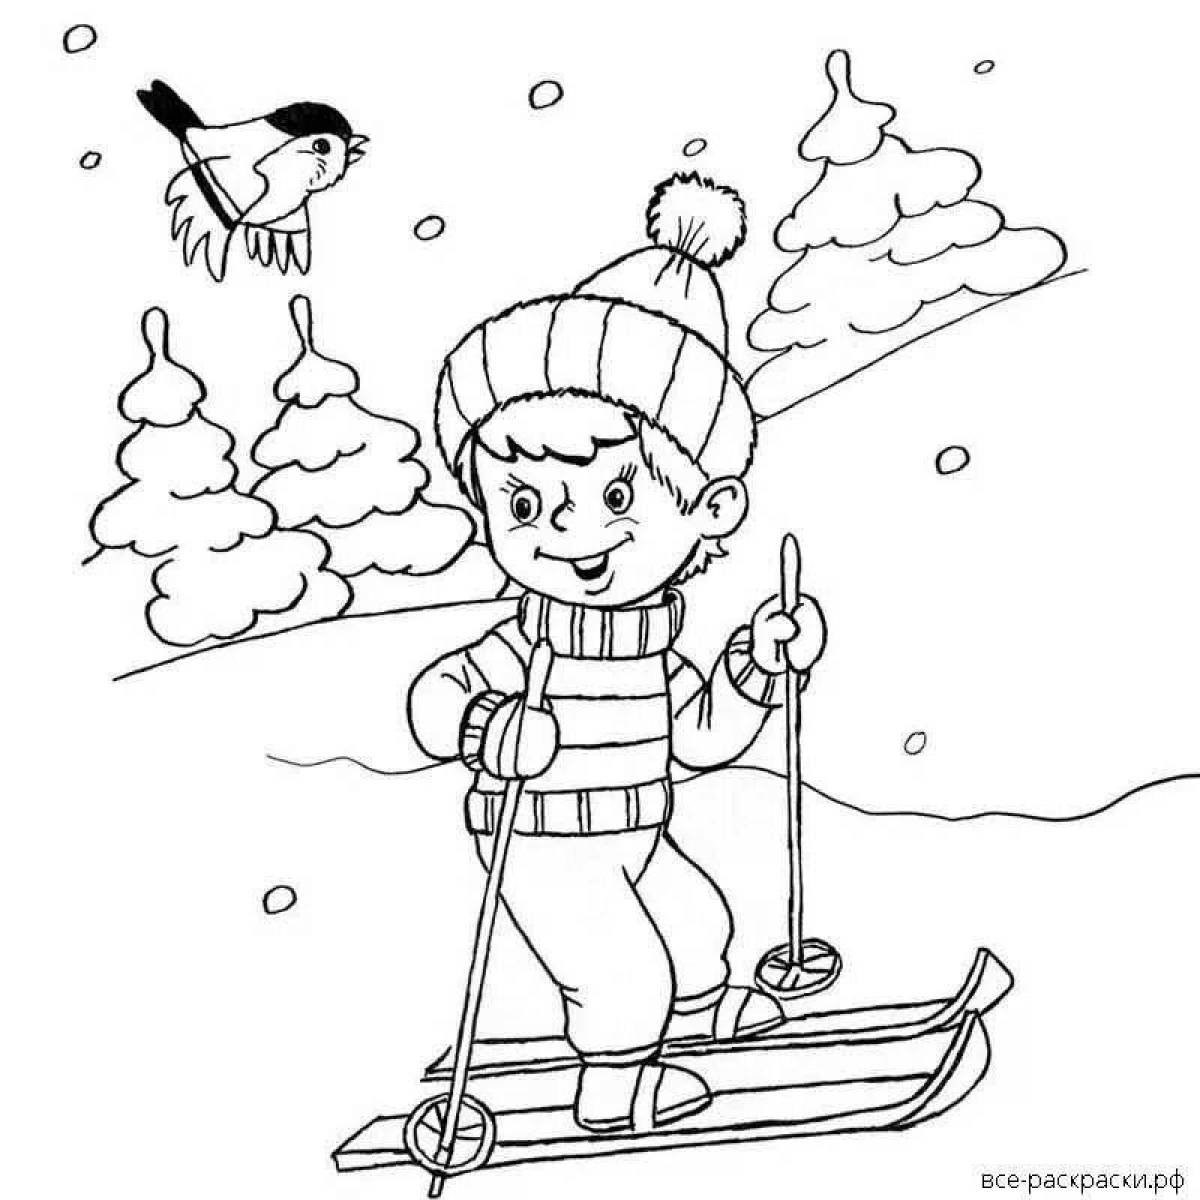 Children's coloring book on a sled